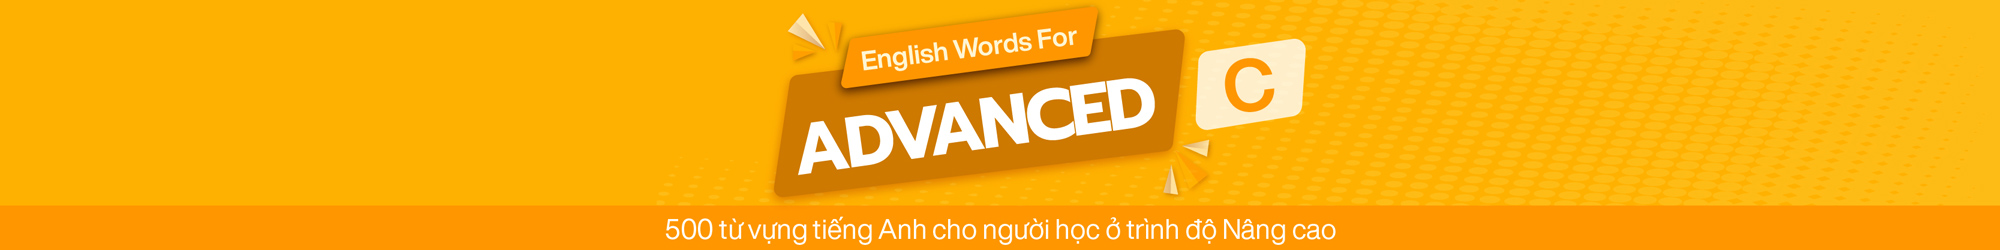 English Words For Advanced (C1+2)